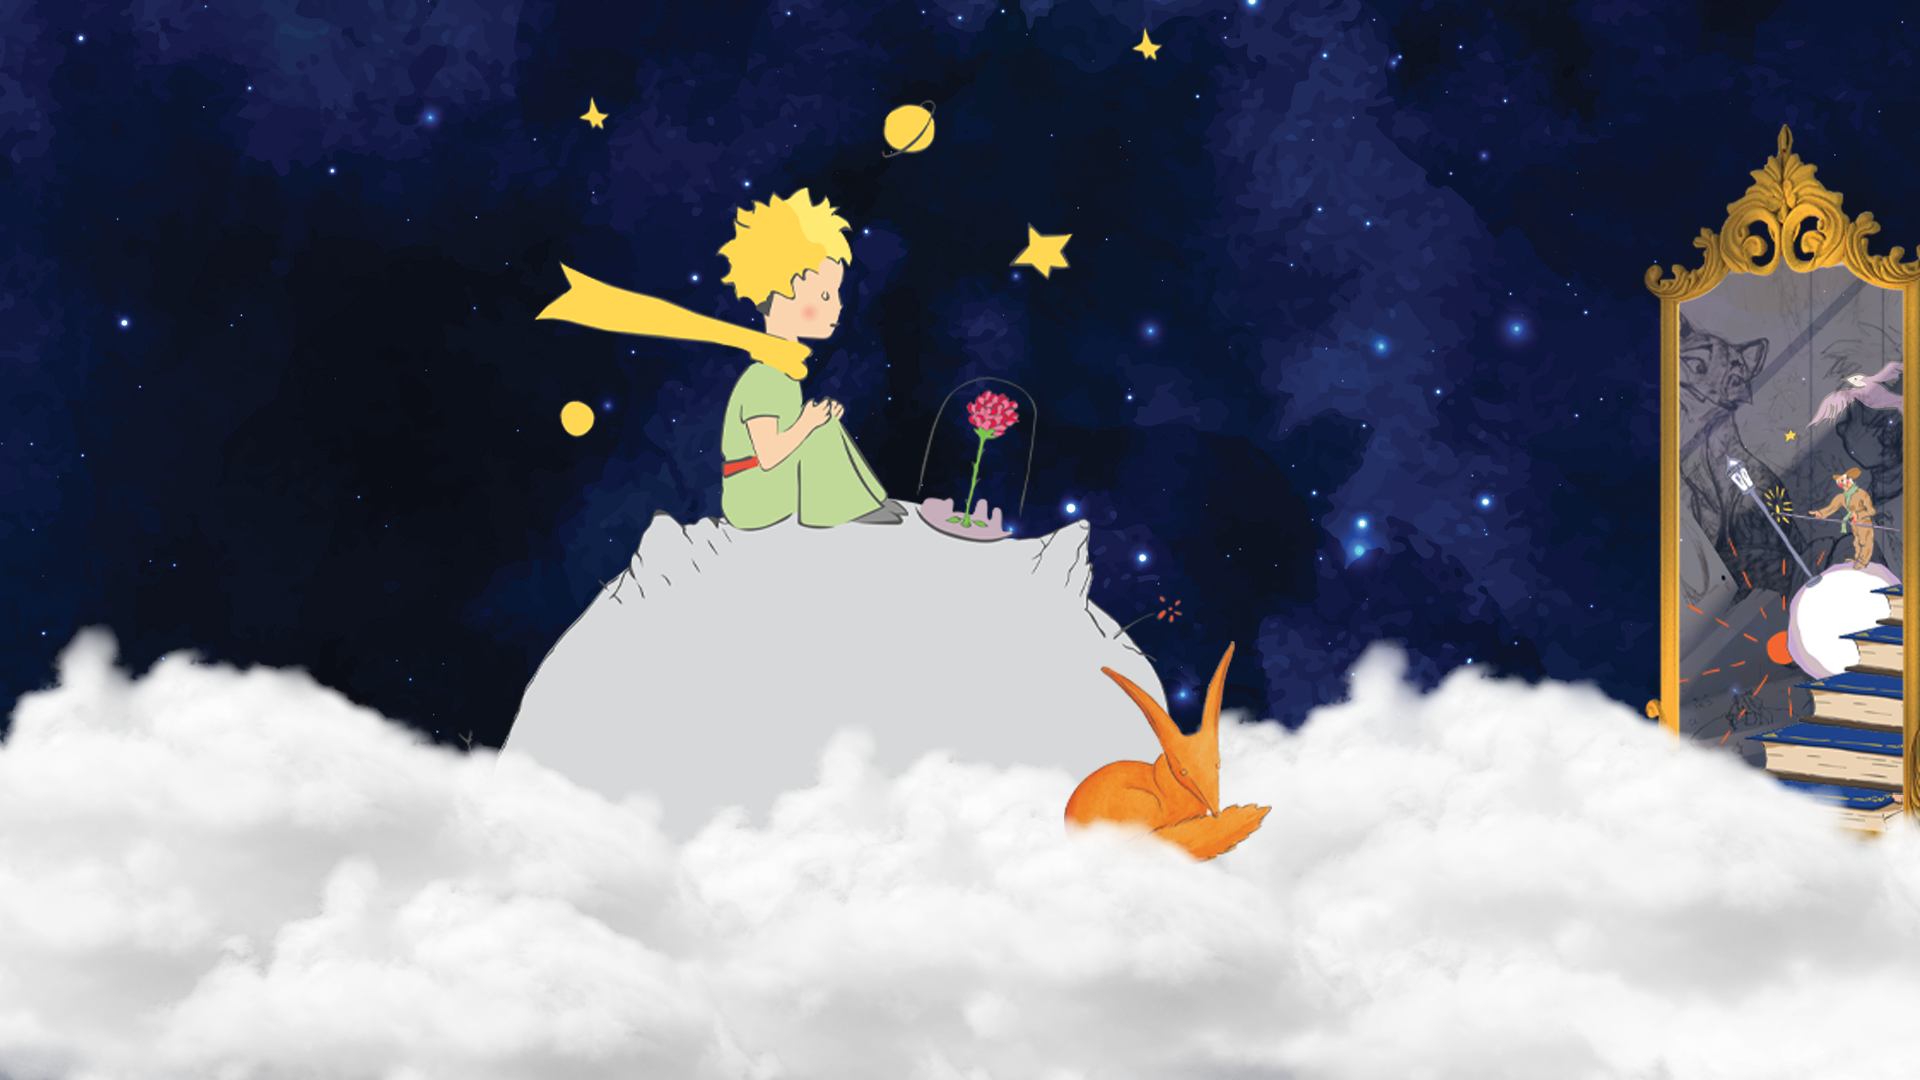 The Little Prince Exhibition is at Galataport Istanbul